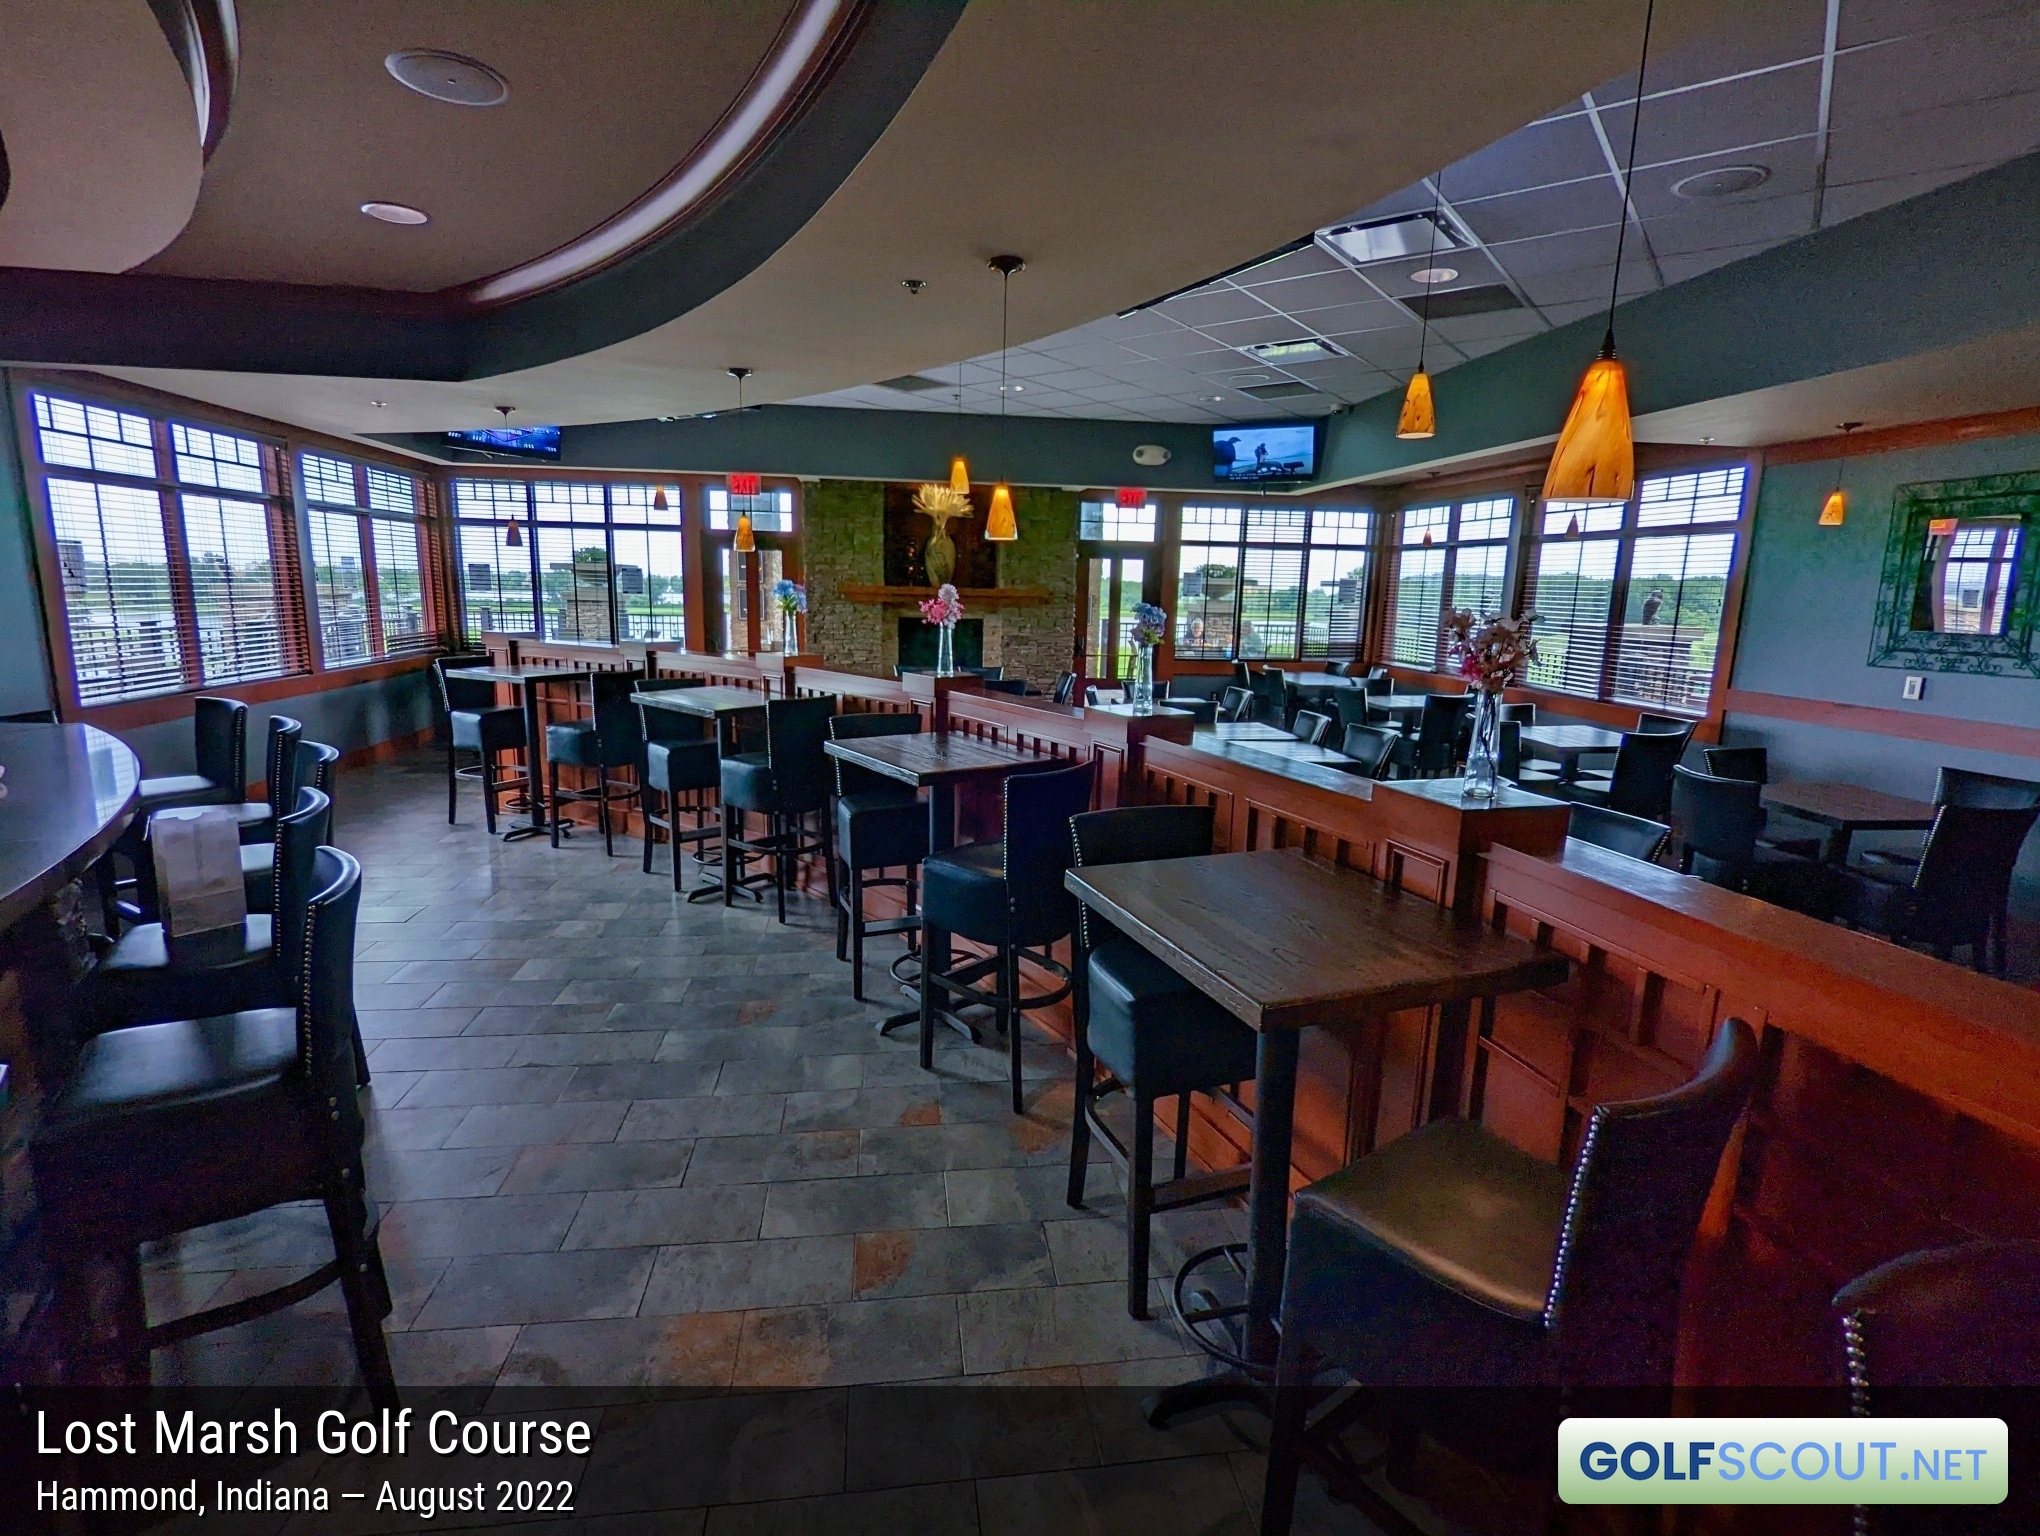 Photo of the restaurant at Lost Marsh Golf Course in Hammond, Indiana. 